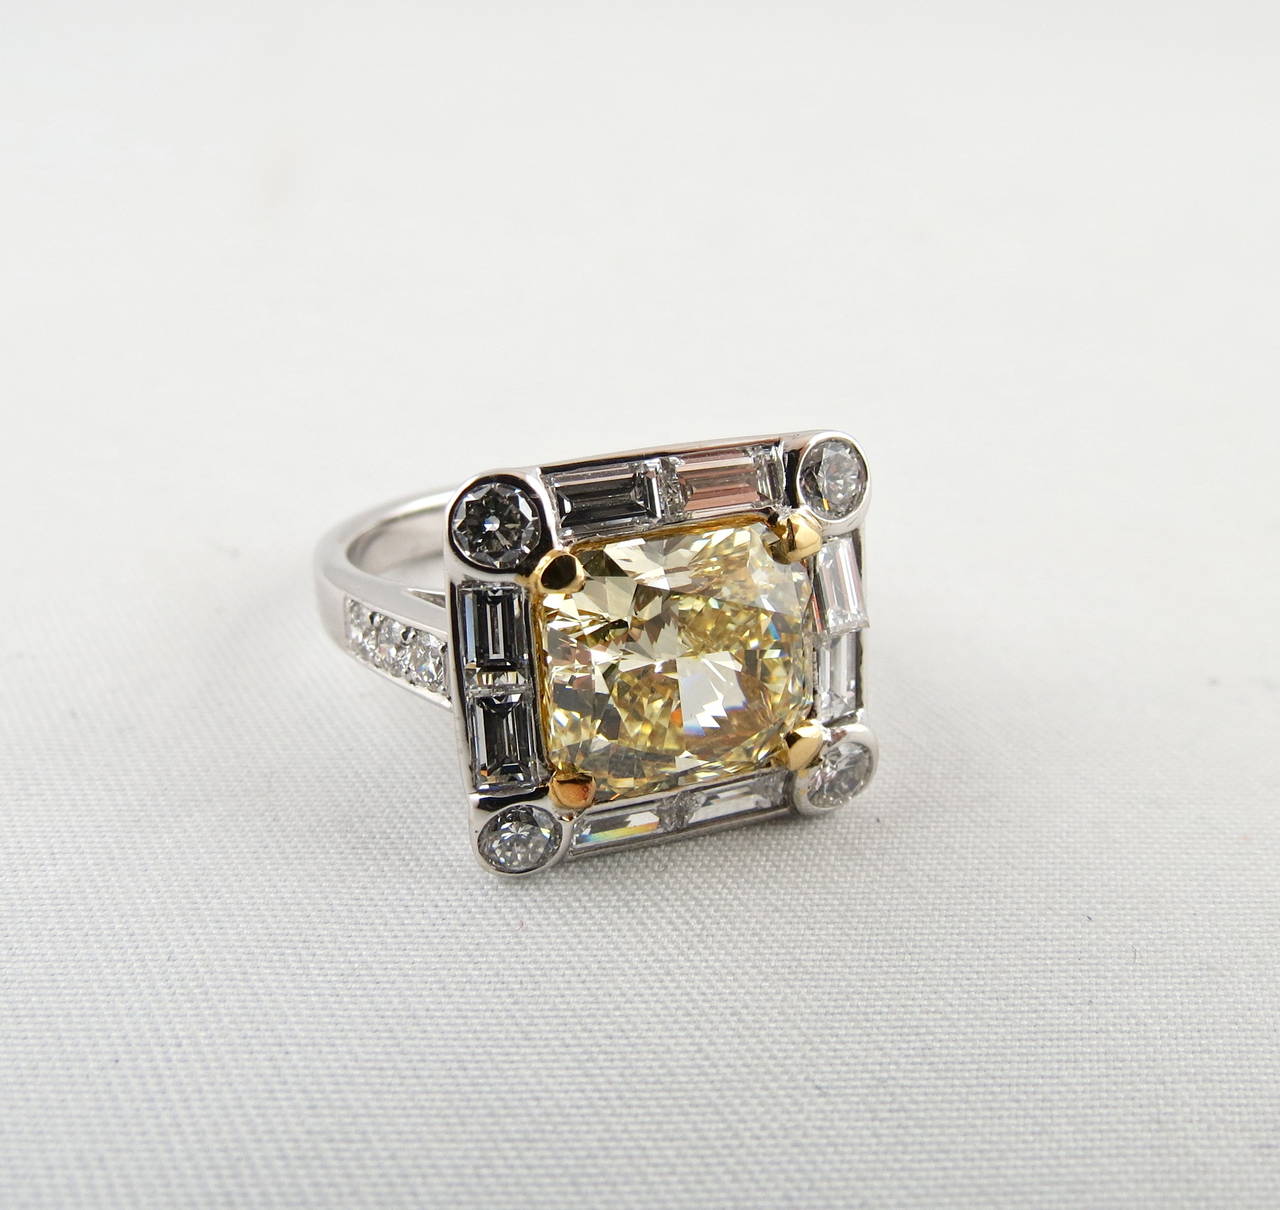 Magnificent diamond ring, centering on a natural fancy yellow diamond weighing 4.01 carats, two diamond baguettes per side around the central diamond, 4 brillant cut diamonds in the corners, mounted in 18k white gold and yellow gold setting.